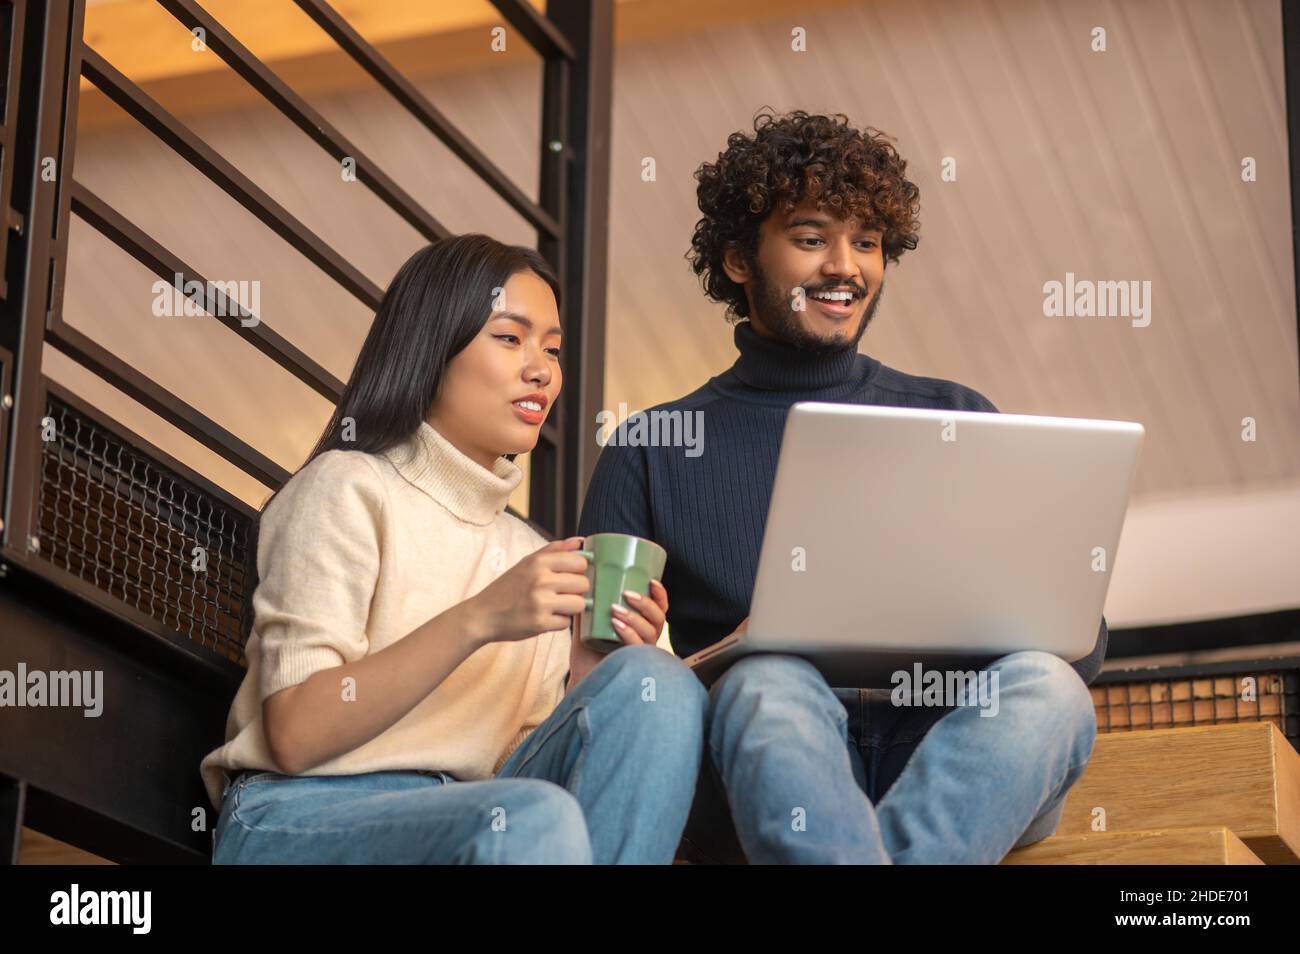 Woman with cup and man looking at laptop Stock Photo